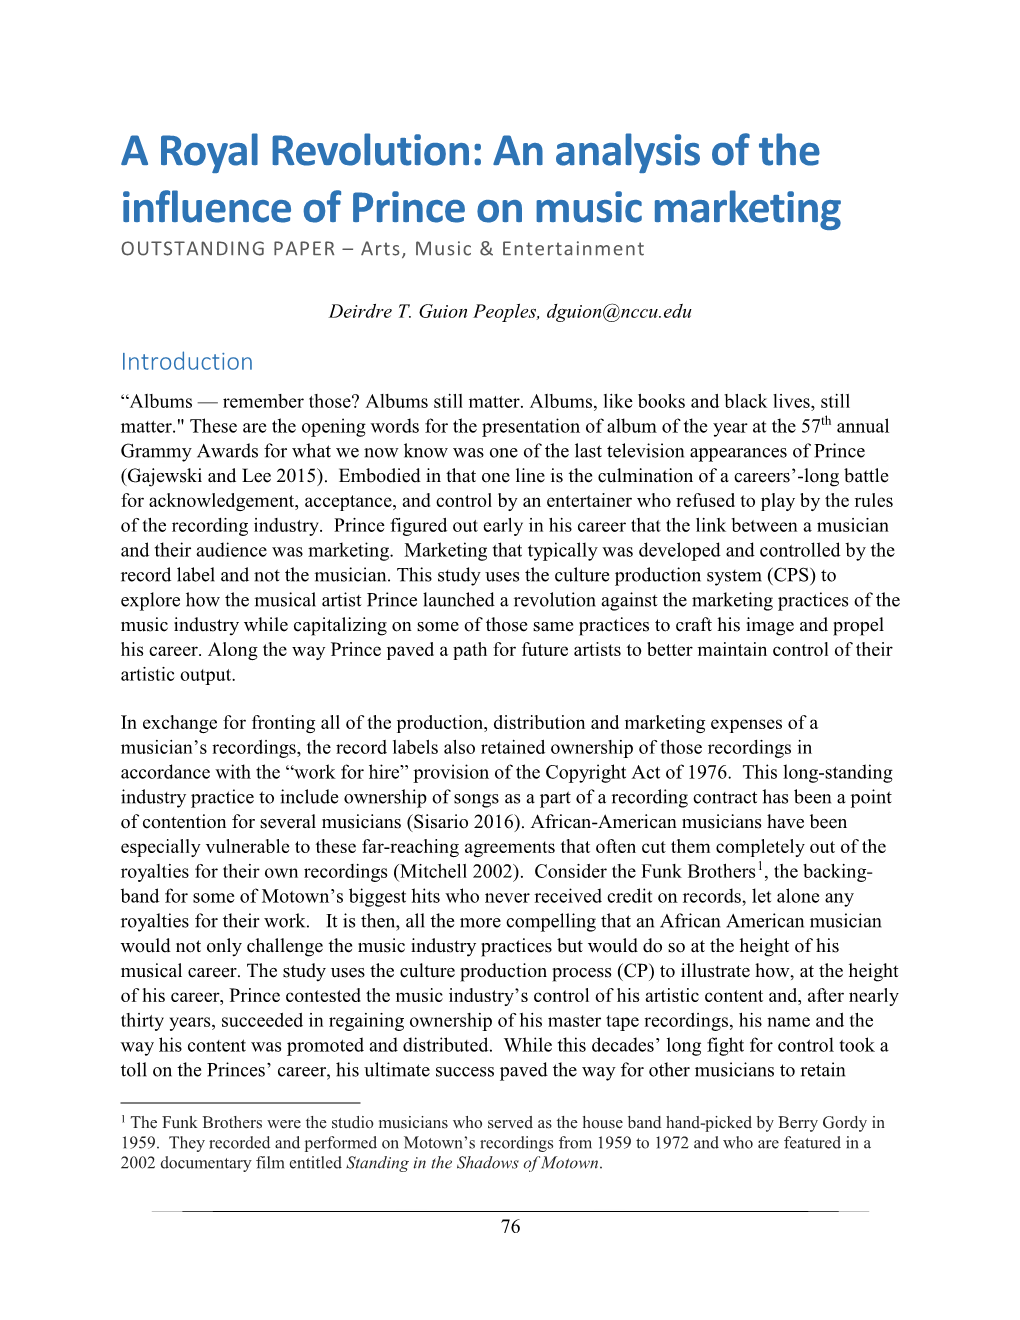 An Analysis of the Influence of Prince on Music Marketing OUTSTANDING PAPER – Arts, Music & Entertainment